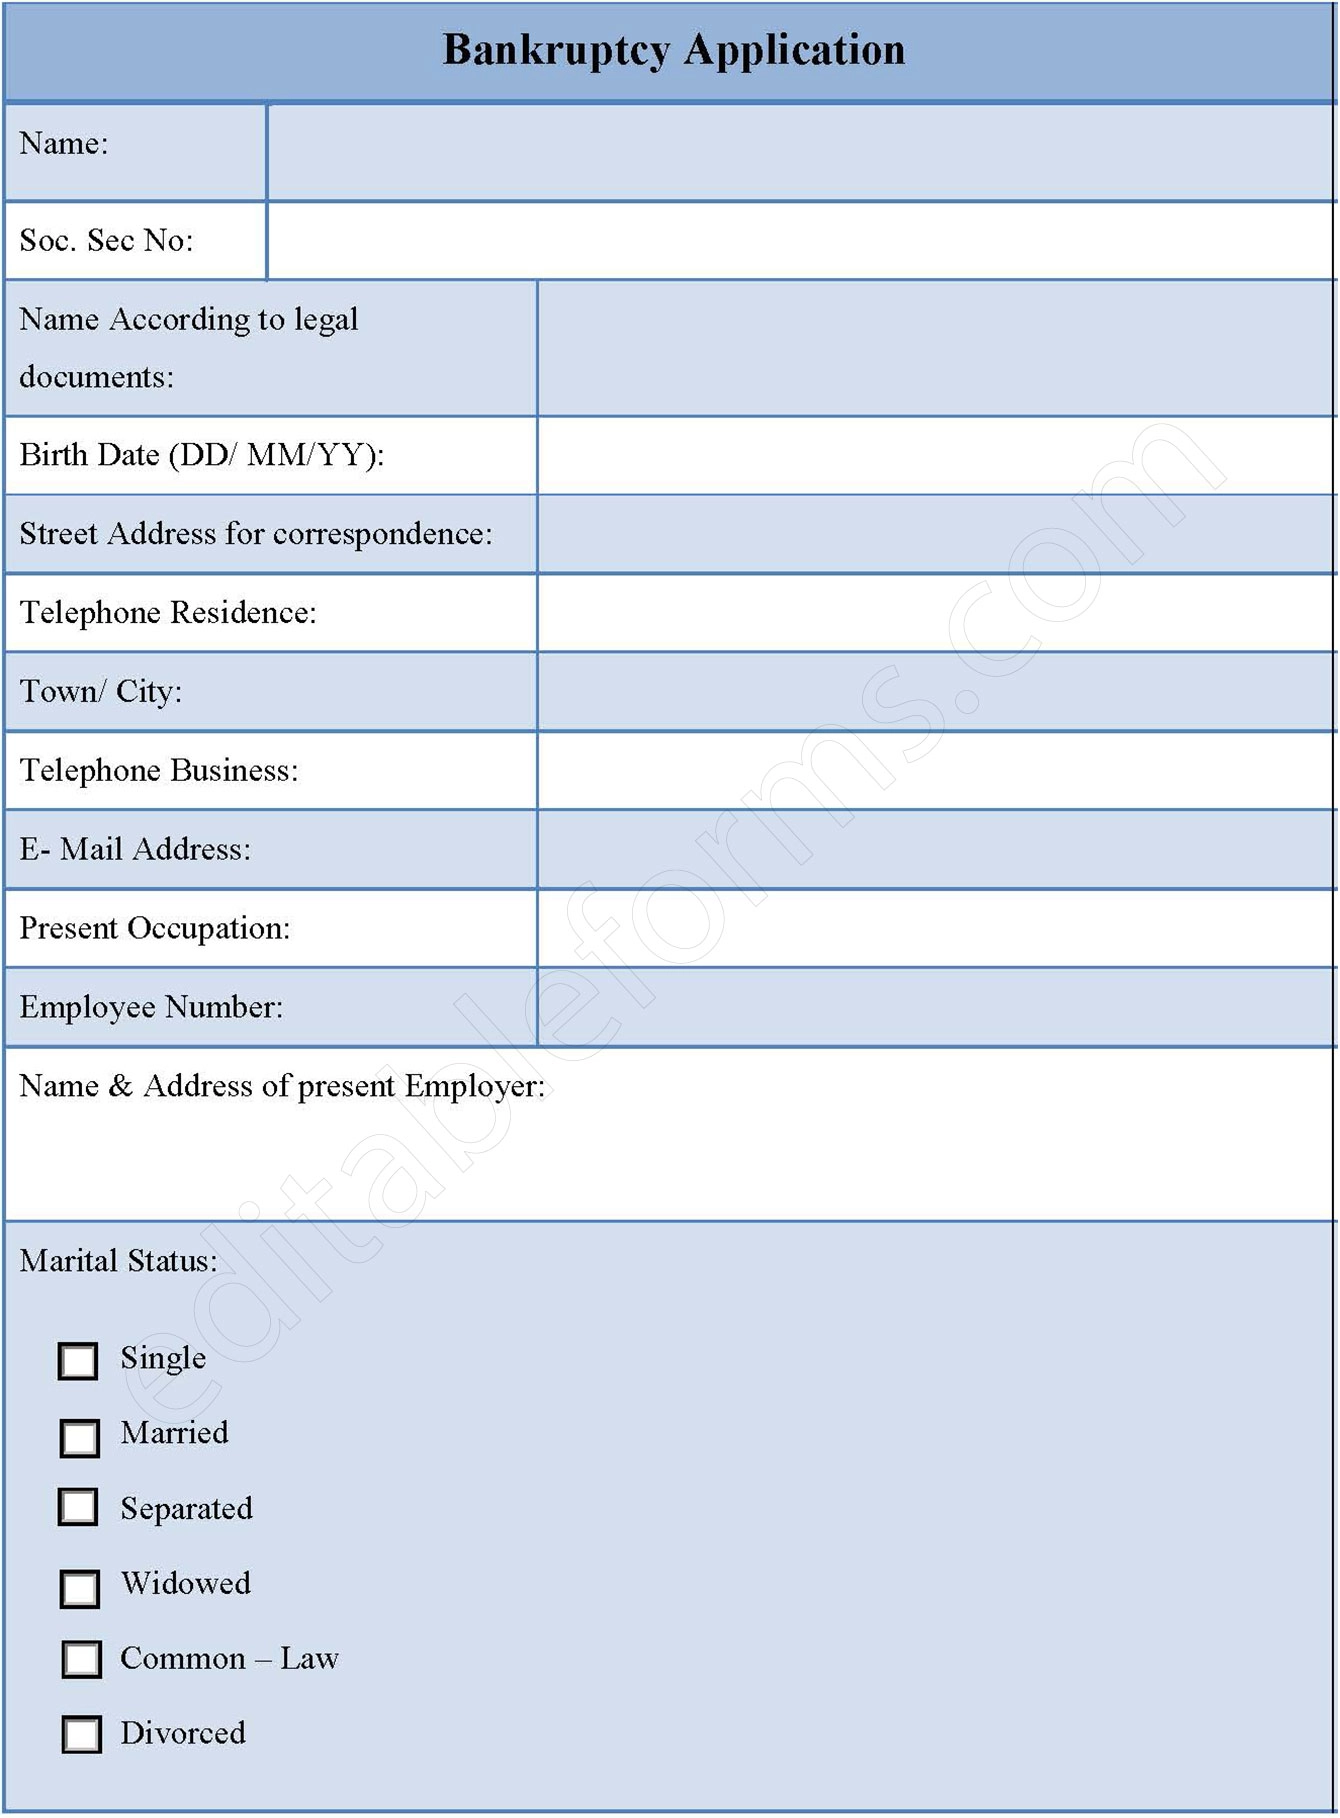 Bankruptcy Application Fillable PDF Template